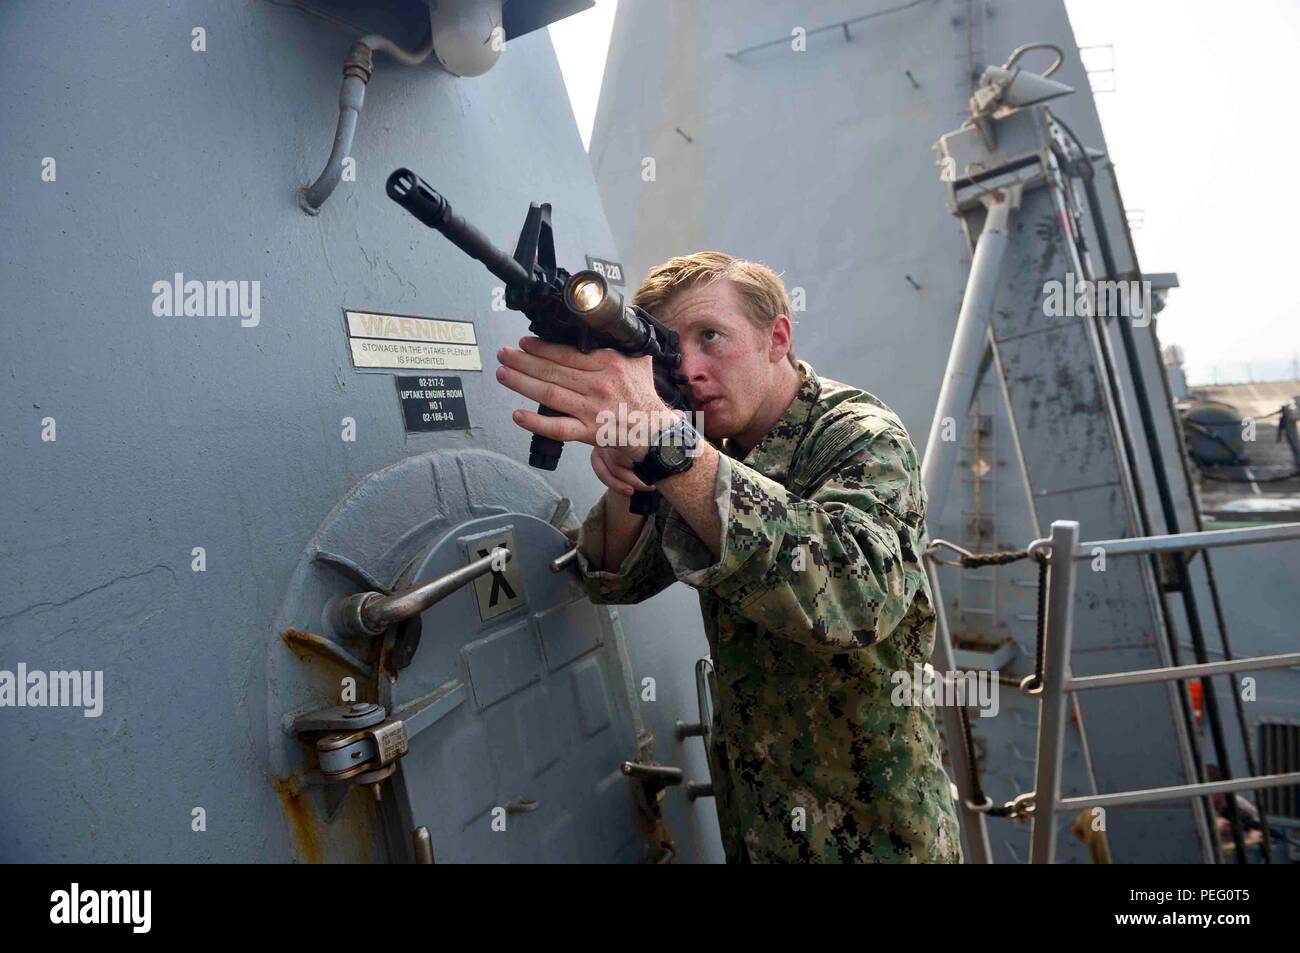 150815-N-ZF498-047 U.S. 5TH FLEET AREA OF OPERATIONS (Aug. 15, 2015) – Intelligence Specialist 3rd Class Jeff Gabelmann, from Fort Pierce, Fla., conducts tactical clearing training as part of the visit, board, search and seizure (VBSS) team aboard the guided-missile destroyer USS Forrest Sherman (DDG 98). Forrest Sherman is deployed to the U.S. 5th Fleet area of operations as part of Theodore Roosevelt Carrier Strike Group supporting Operation Inherent Resolve, strike operations in Iraq and Syria as directed, maritime security operations and theater security cooperation efforts in the region.  Stock Photo